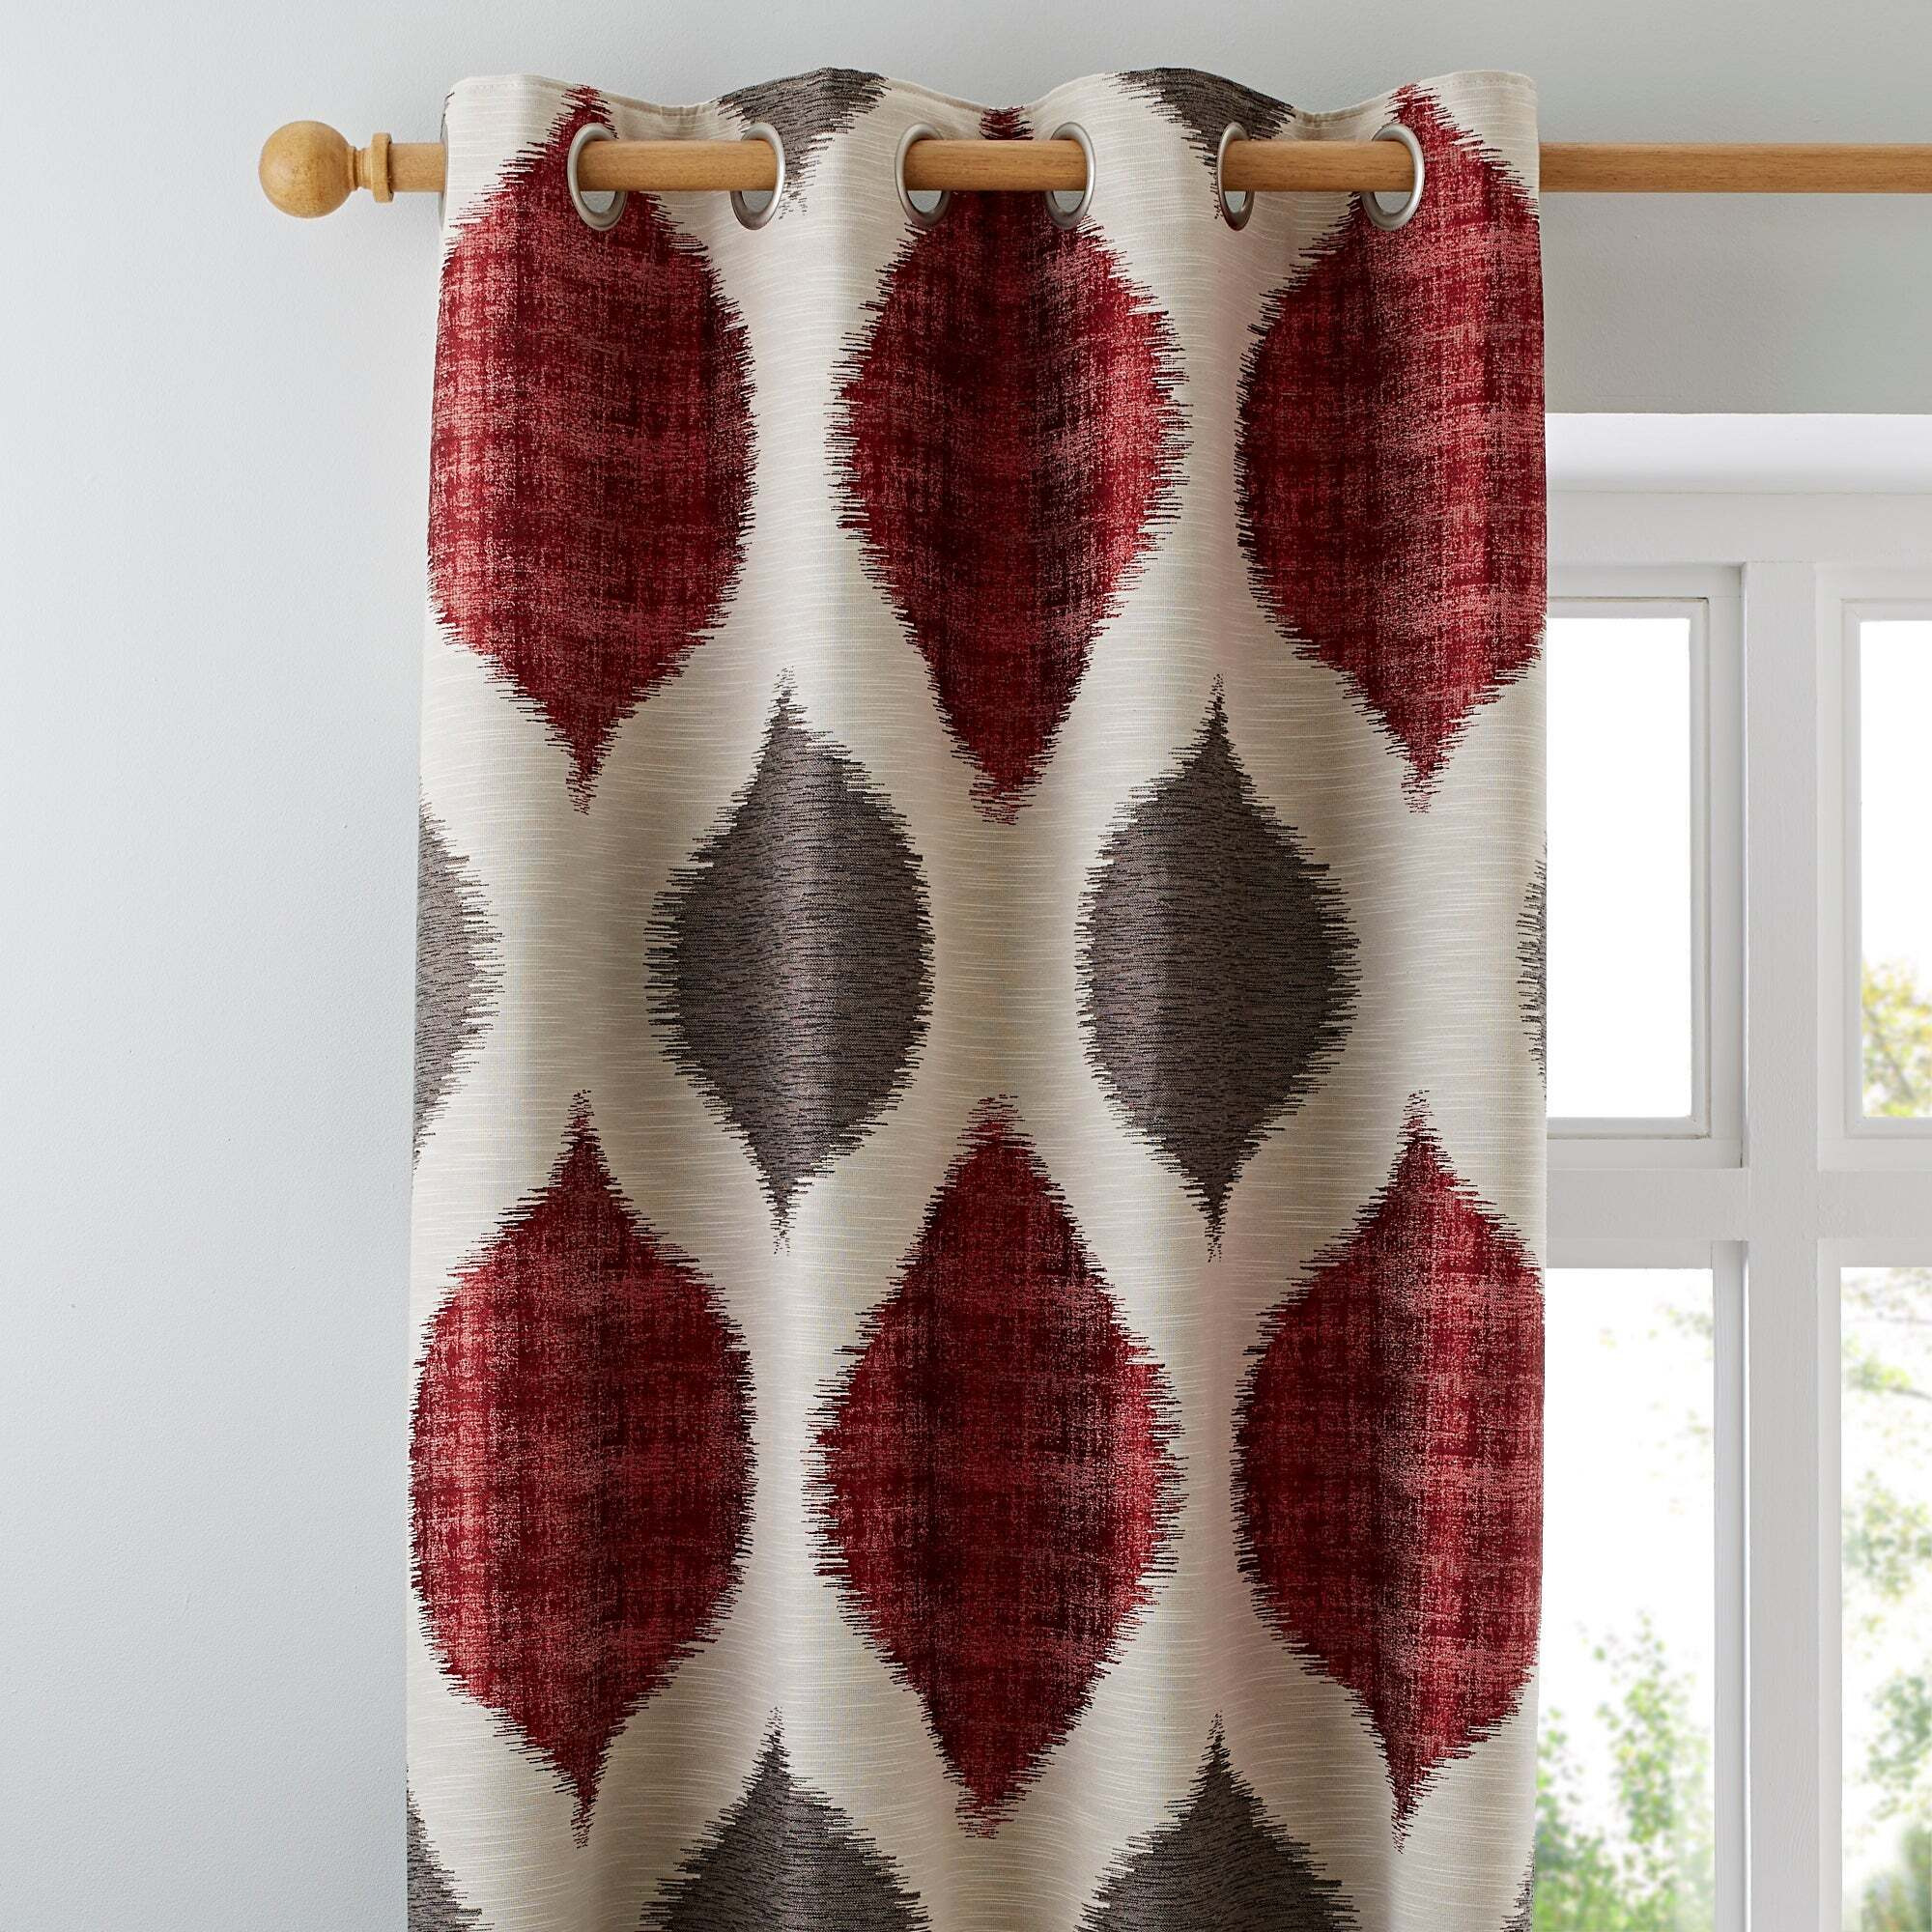 Morocco Red Eyelet Curtains Red and Brown